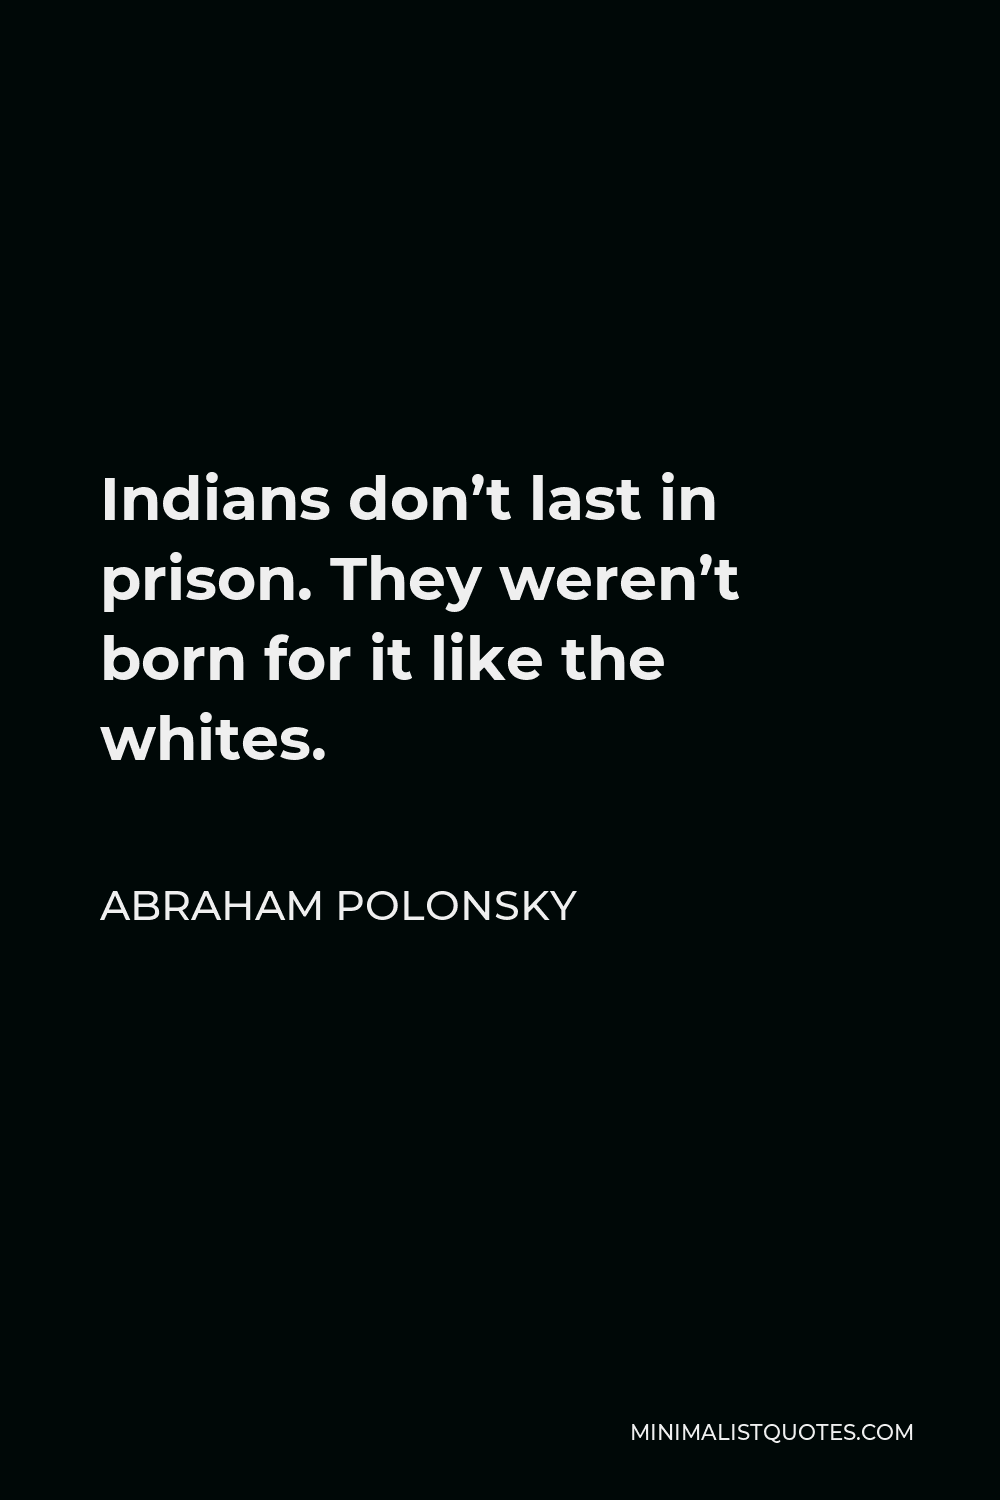 Abraham Polonsky Quote - Indians don’t last in prison. They weren’t born for it like the whites.